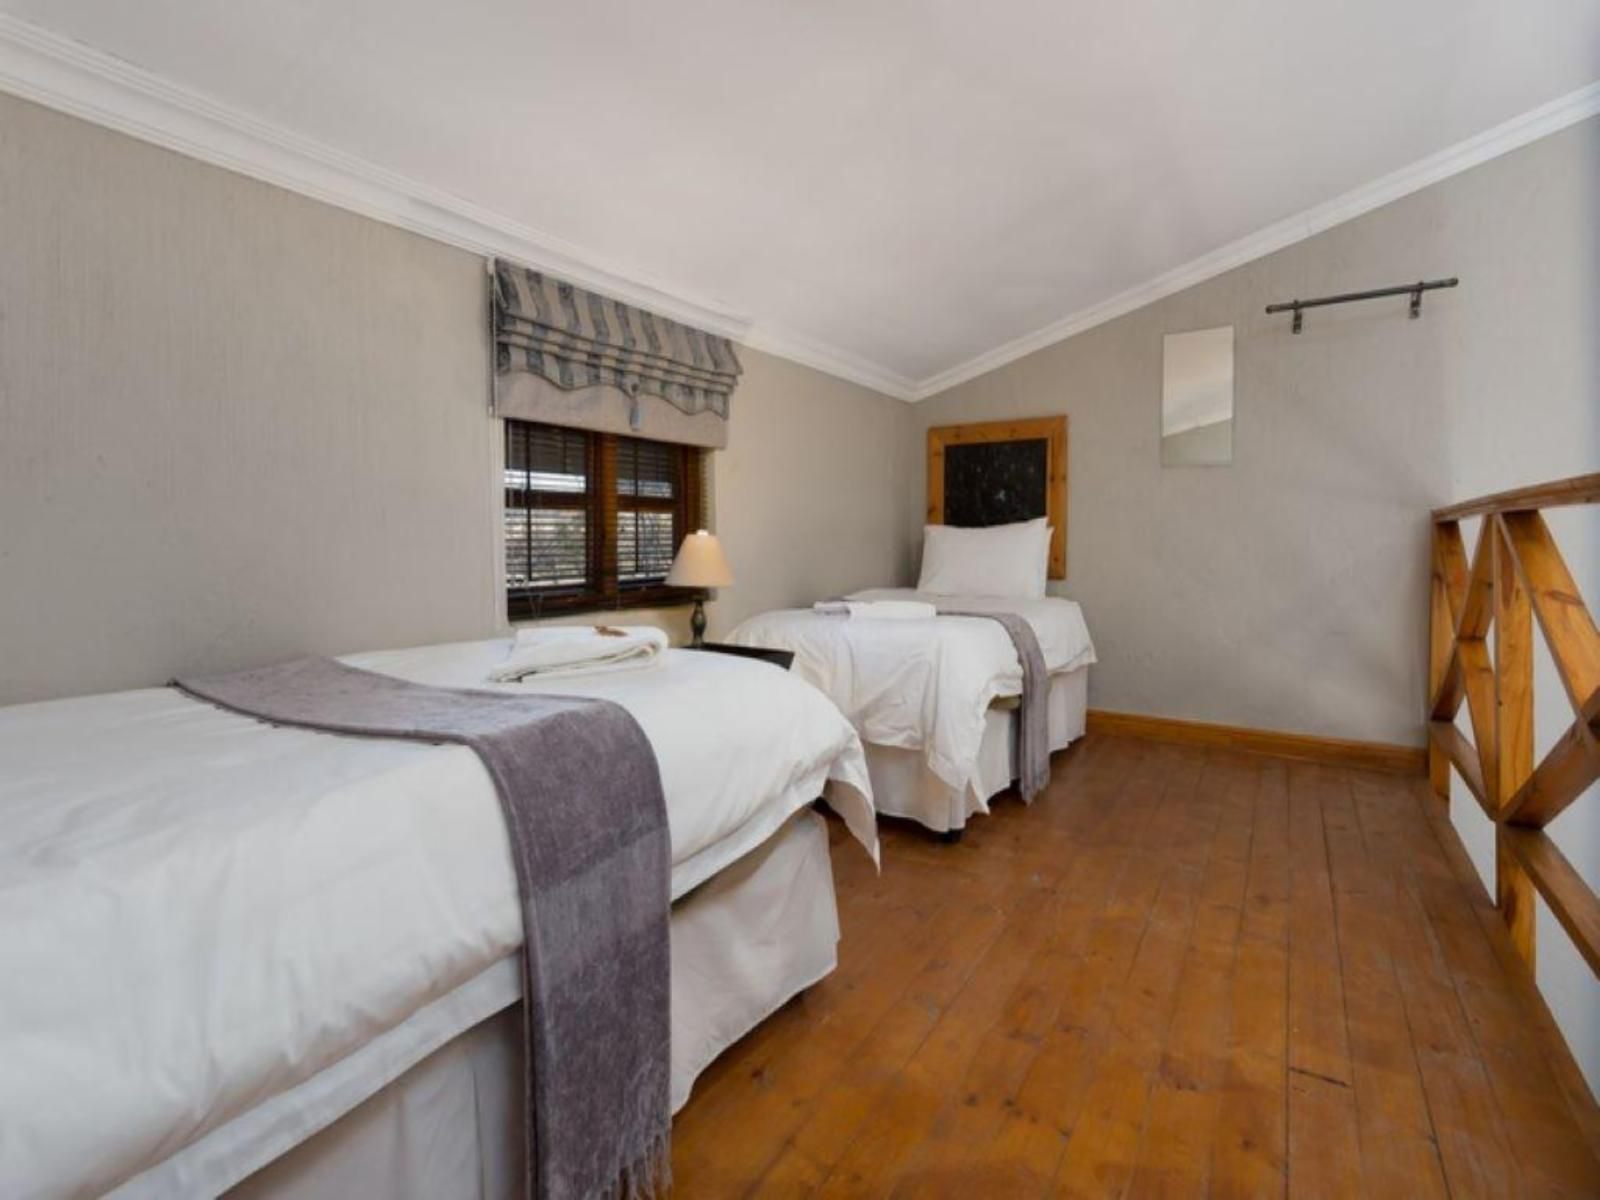 Mont D Or Monte Bello Estate Bayswater Bloemfontein Free State South Africa Bedroom